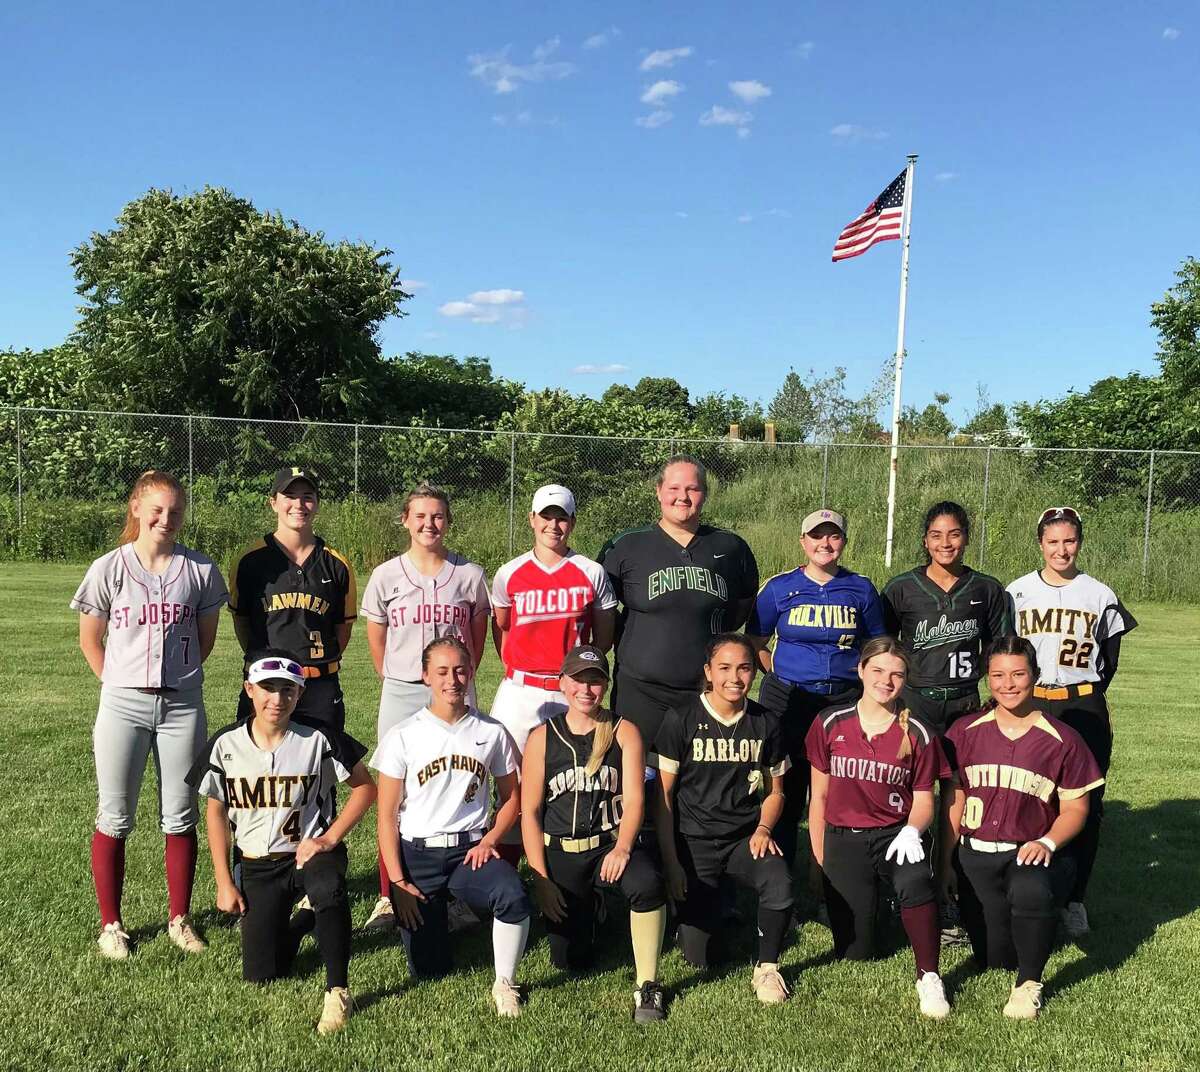 The CT High School All-Star softball team met the Stratford Brakettes for the 21st time onThursday. Team members (front row) are Juliette Zito, Amity; Sammie Franceschi, East Haven; May Dowes, Woodland; Abby Ota Barlow, Kaylee Dobransky, Academy of Sciences/Innovation and Kenadie Gonzalez, South Windsor; (second row) Brittany Mairano, St. Joseph; Maddie Lula, Jonathan Law; Maddy Fitzgerald, St. Joseph; Katie Cosmos, Wolcott; Makenzie Cray, Enfield; Alexandra Silver, Rockville; Milycza Perez, Maloney and Kelly Pritchard, Amity.